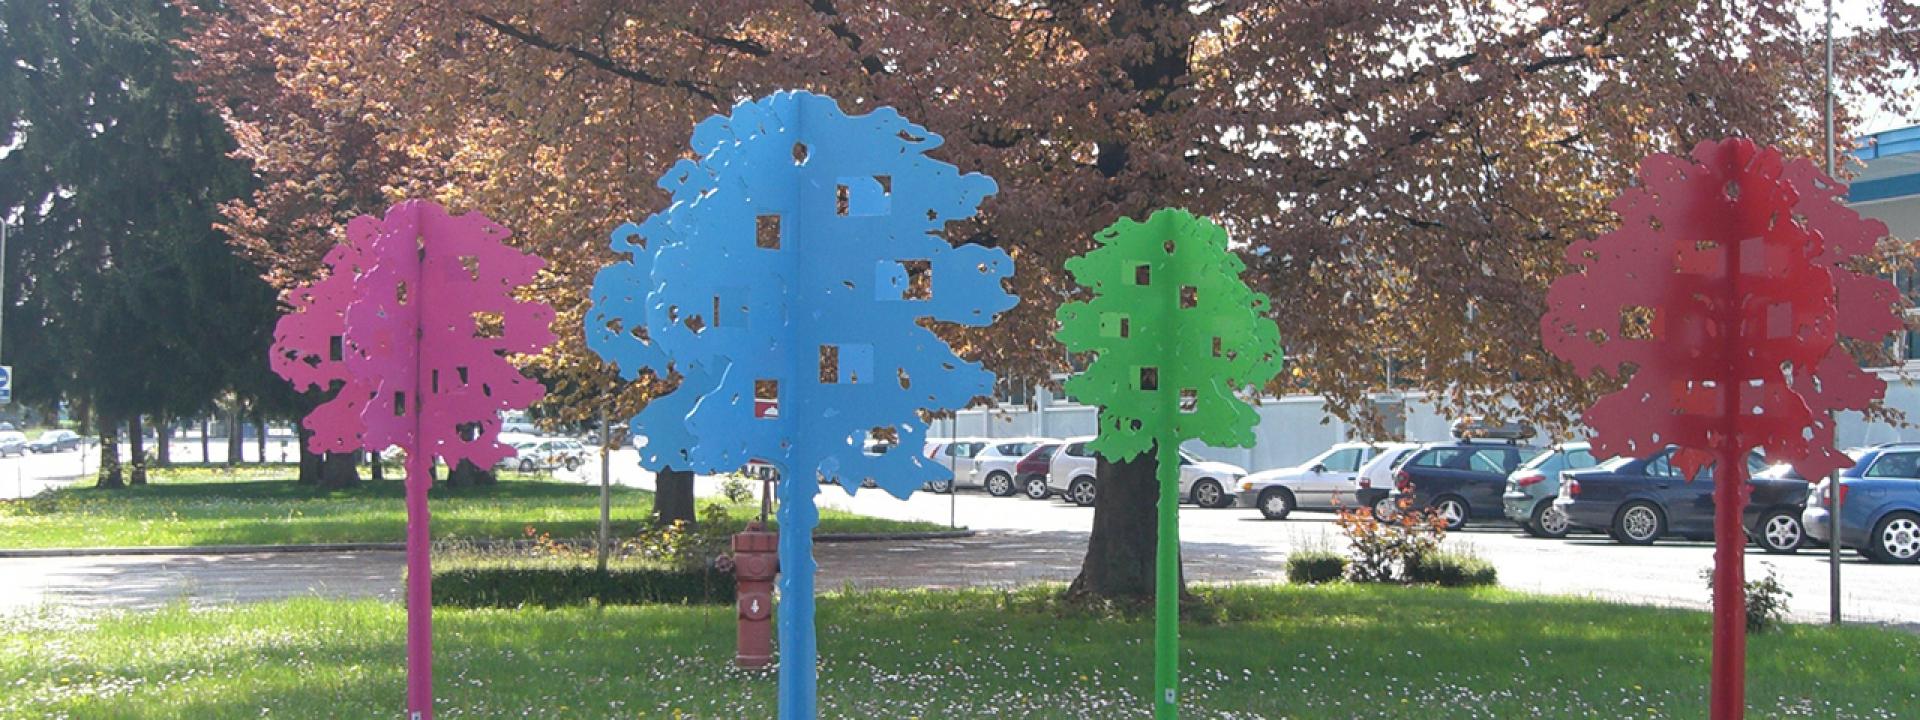 AGC trees in Cuneo (Italy)